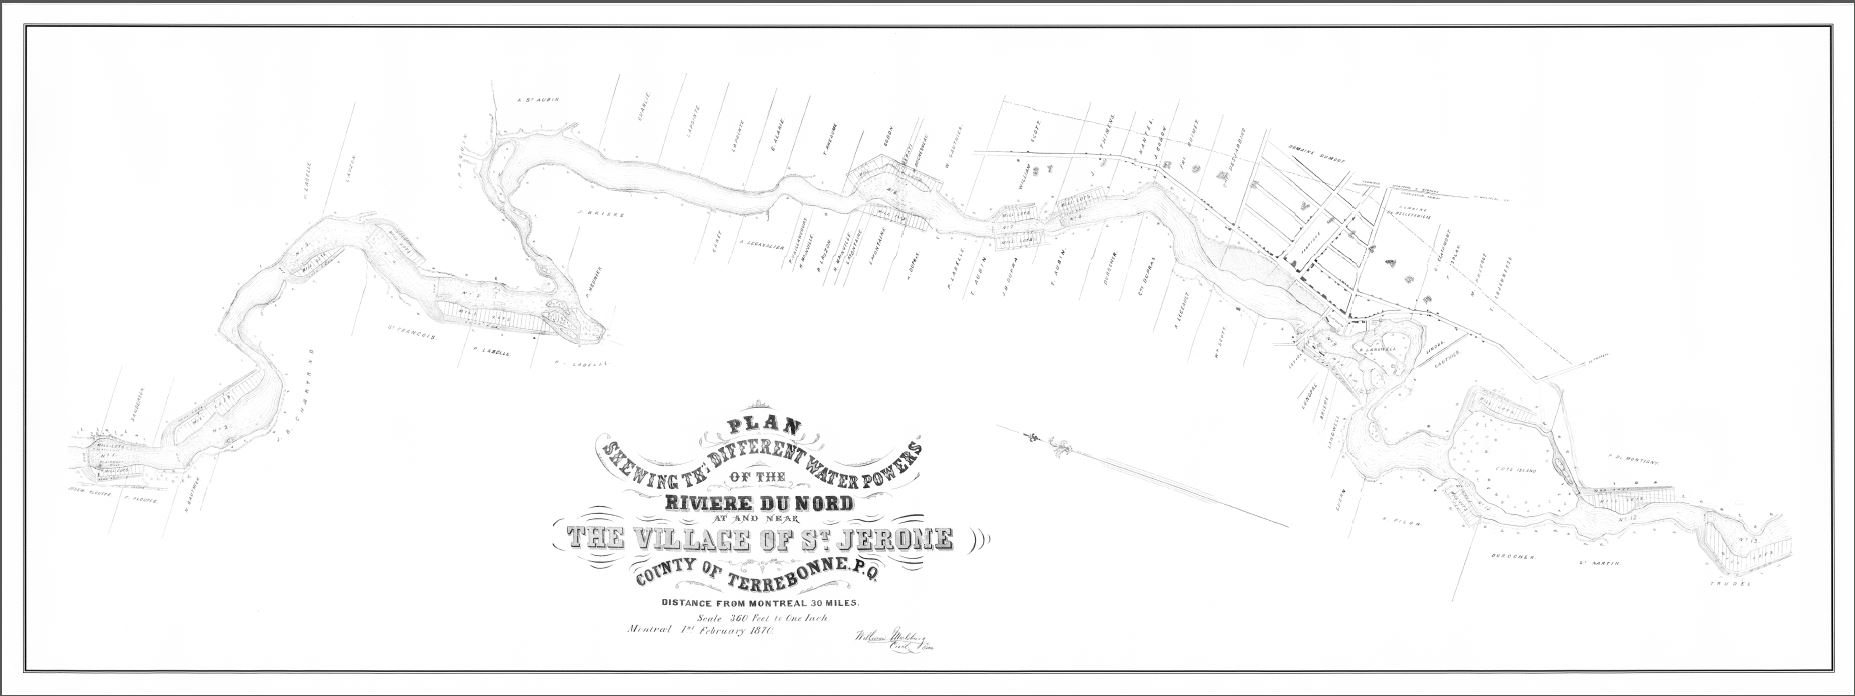 Hand-drawn plan of a stretch of a river. The plan shows the location of lots, streets and buildings. The river rapids are indicated as waterpower sites. The legend below the map reads: “Plan shewing [sic] the different water powers of the Rivière du Nord, at and near the village of St. Jerome.”